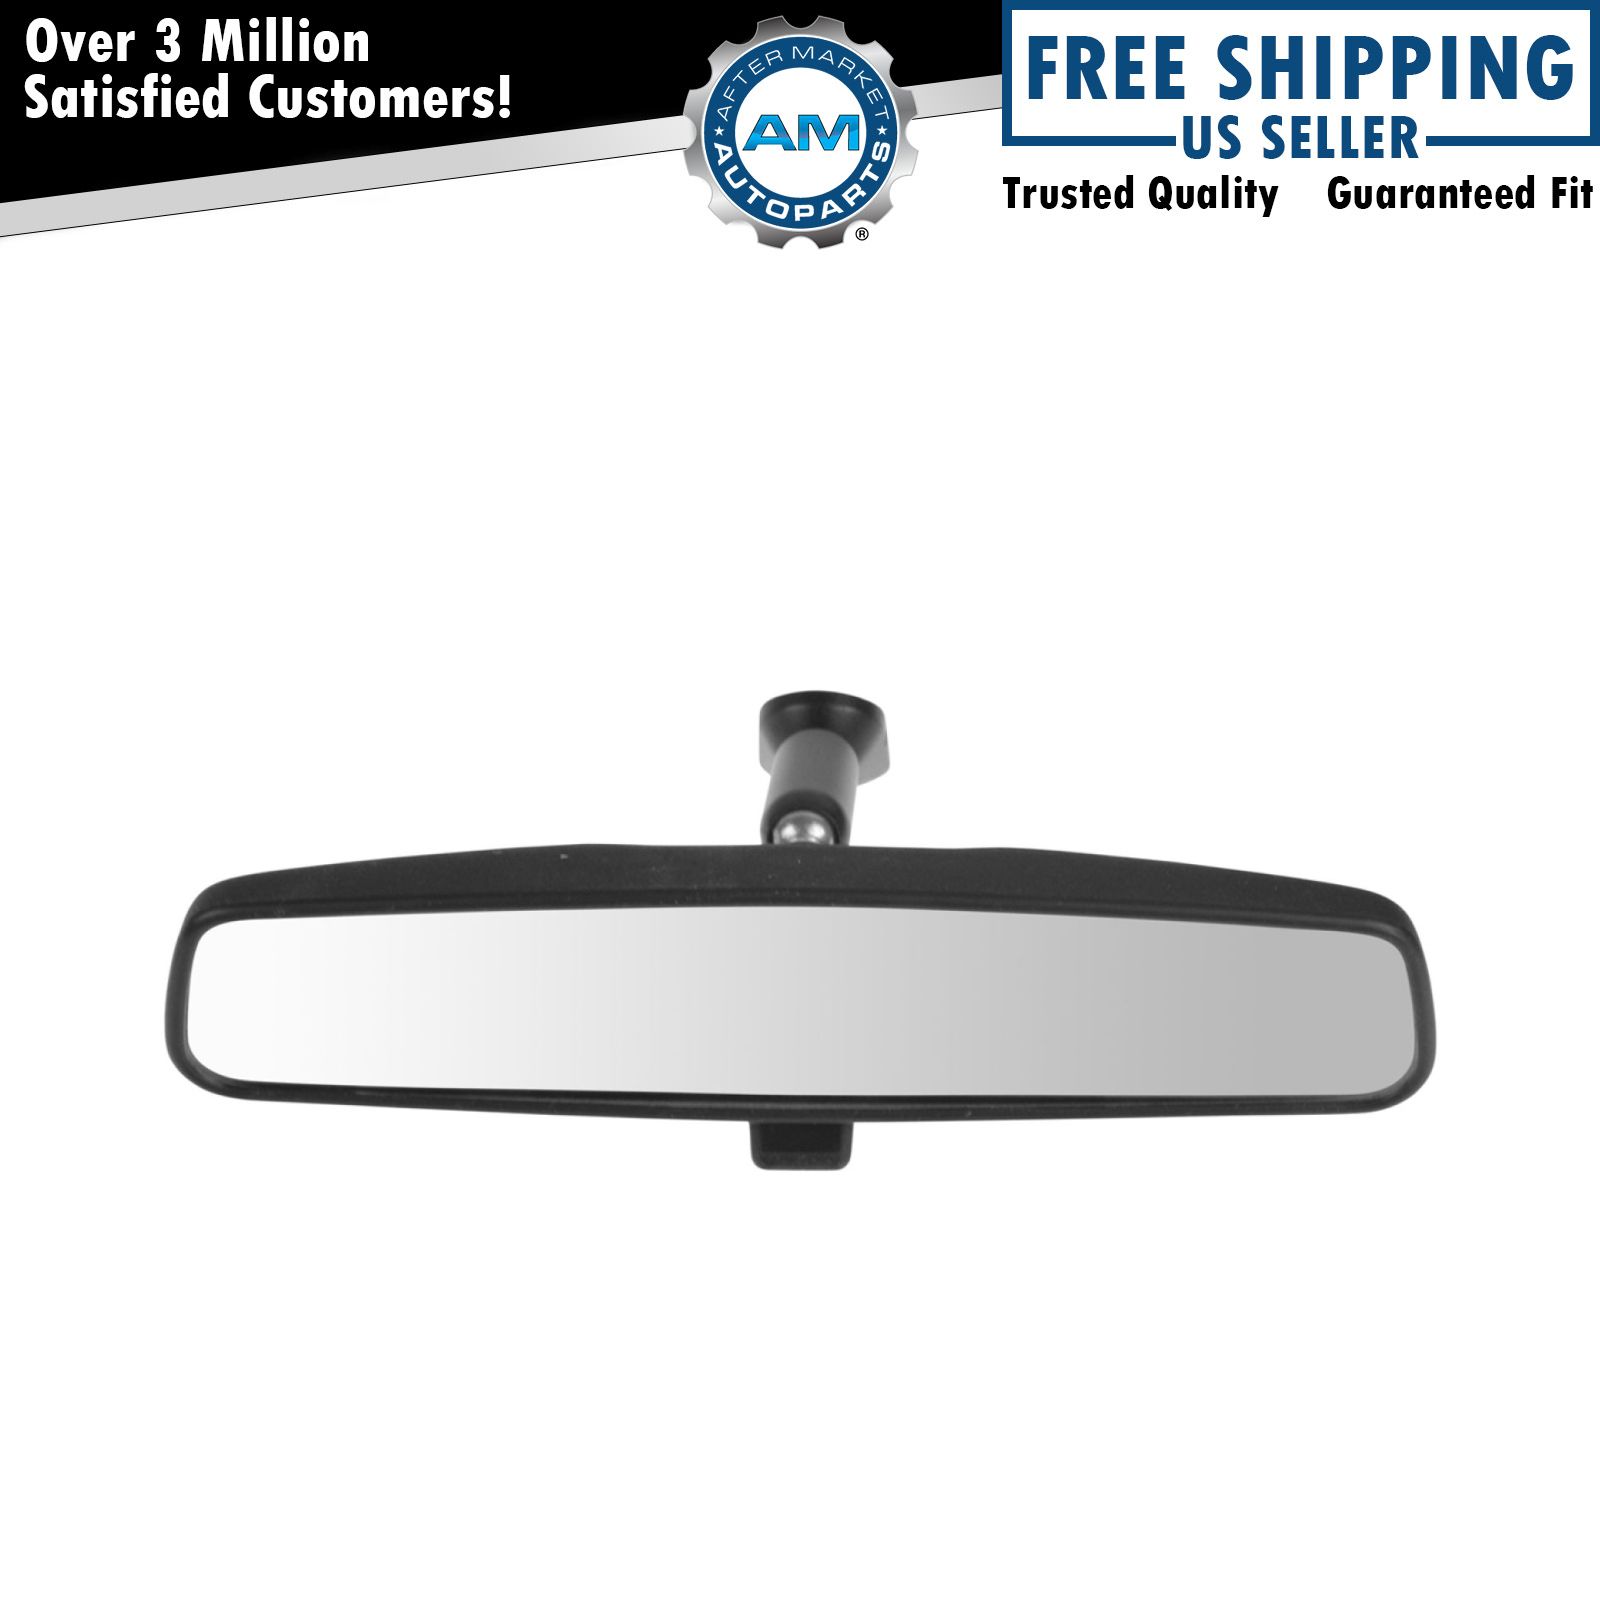 OEM 25603373 Interior Inside Rear View Mirror for Chevy Cadillac Olds GMC Saturn